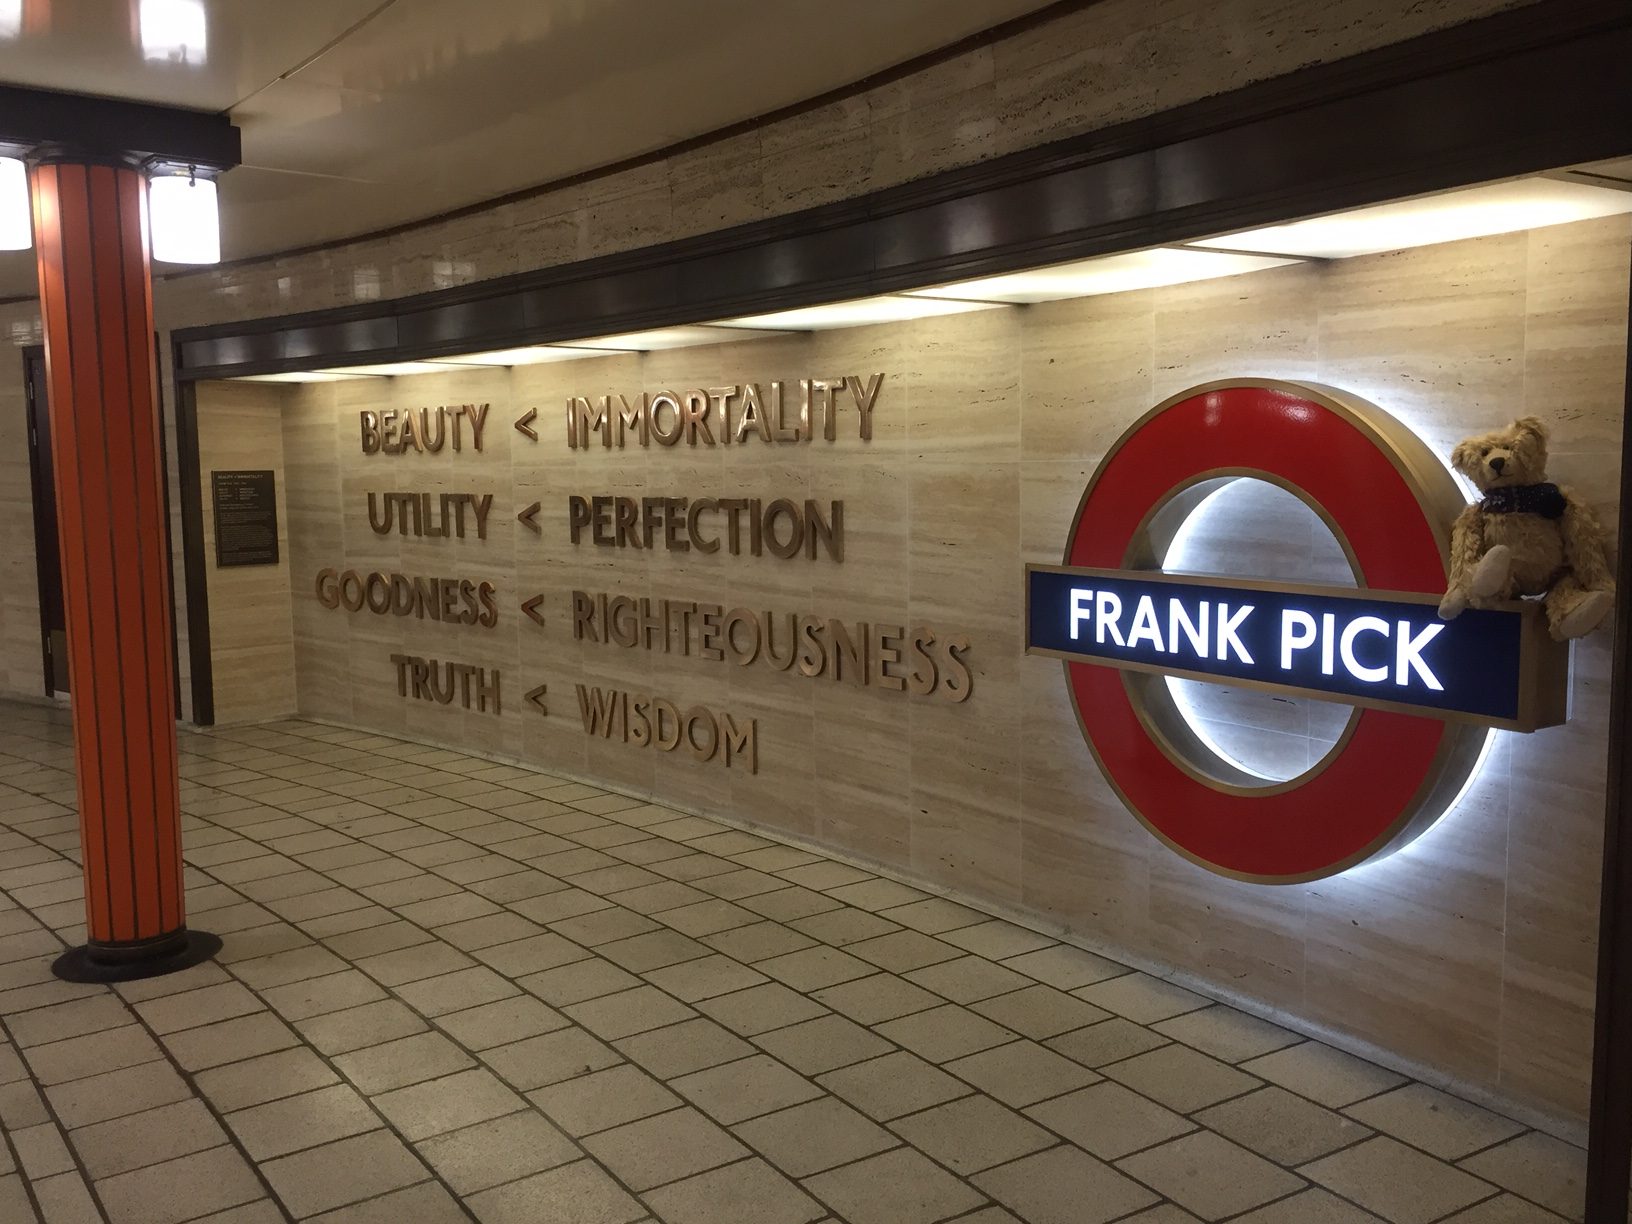 Piccadilly Circus: Frank Pick.